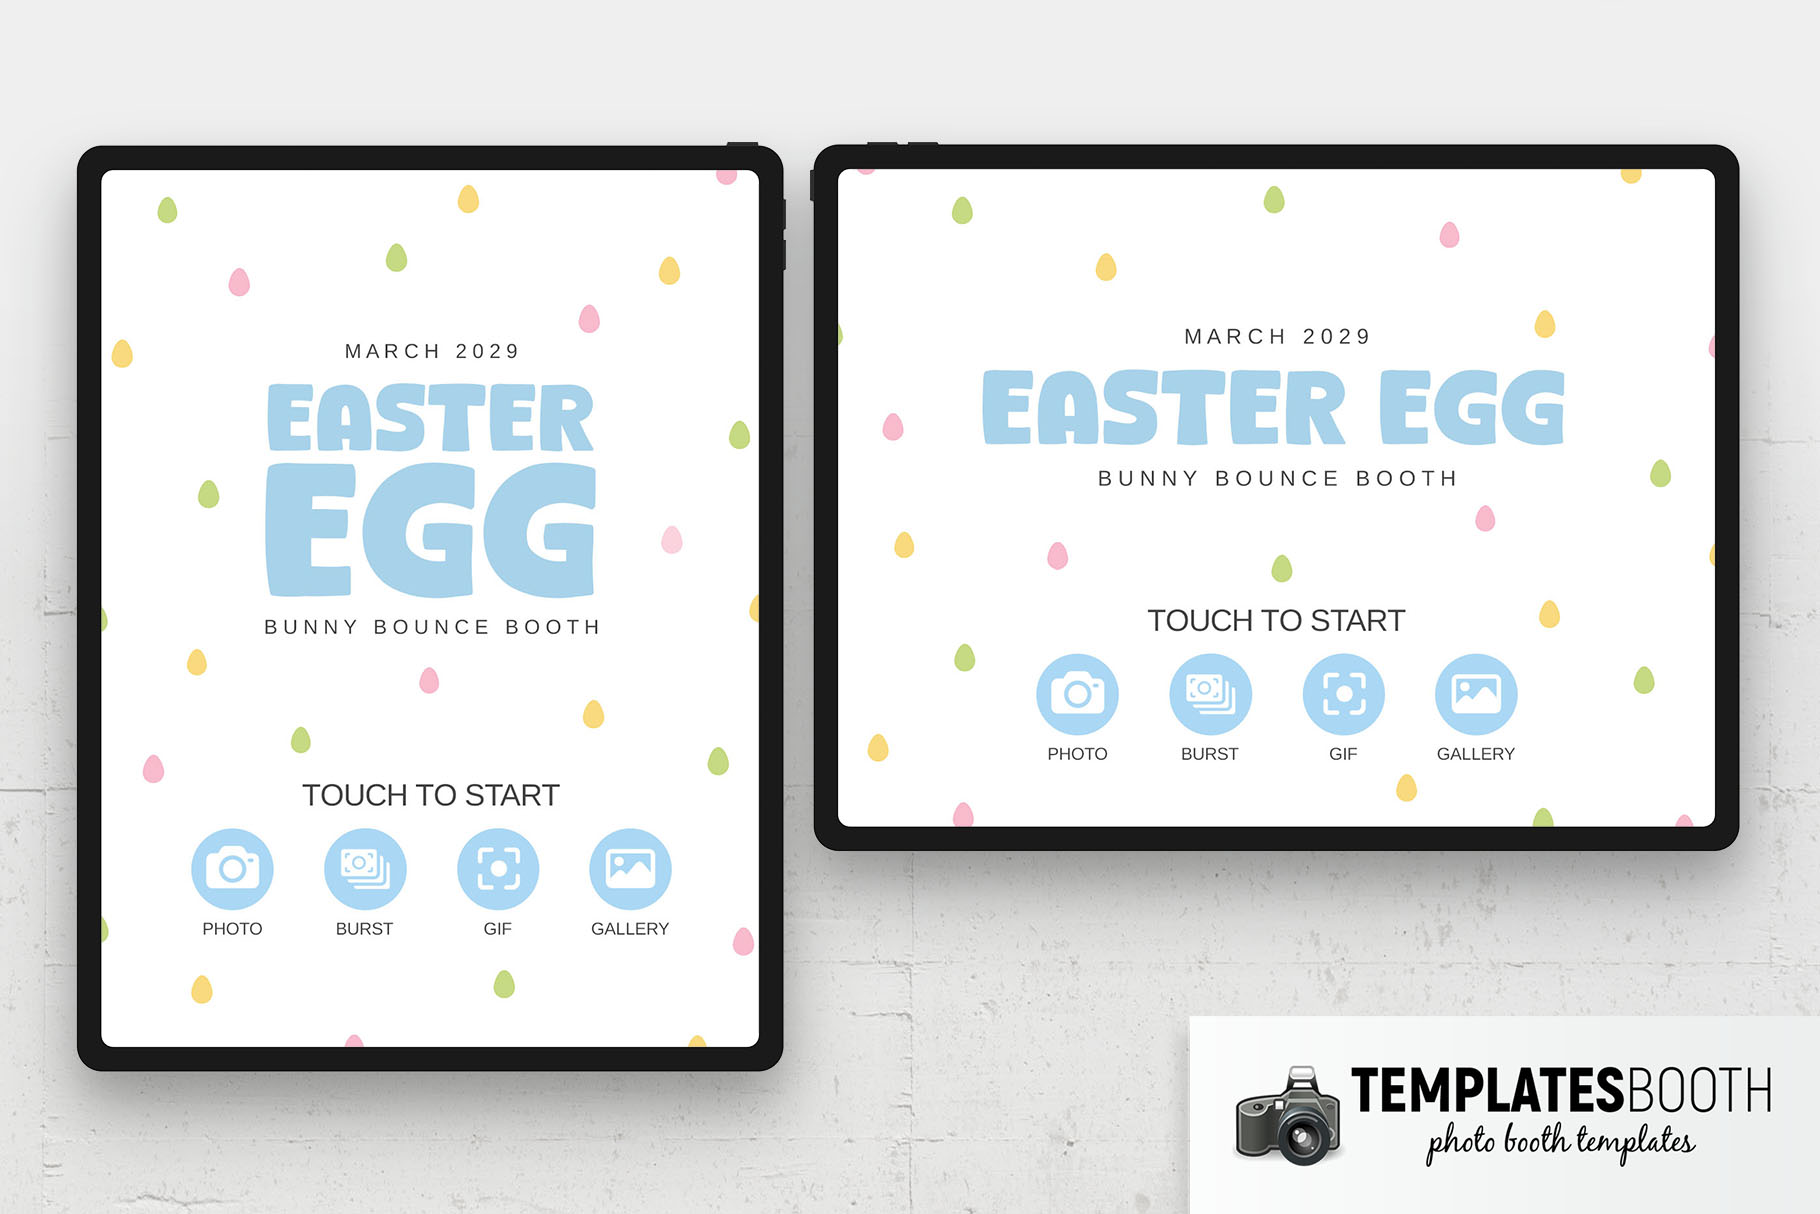 Cute Simple Easter Photo Booth Welcome Screen